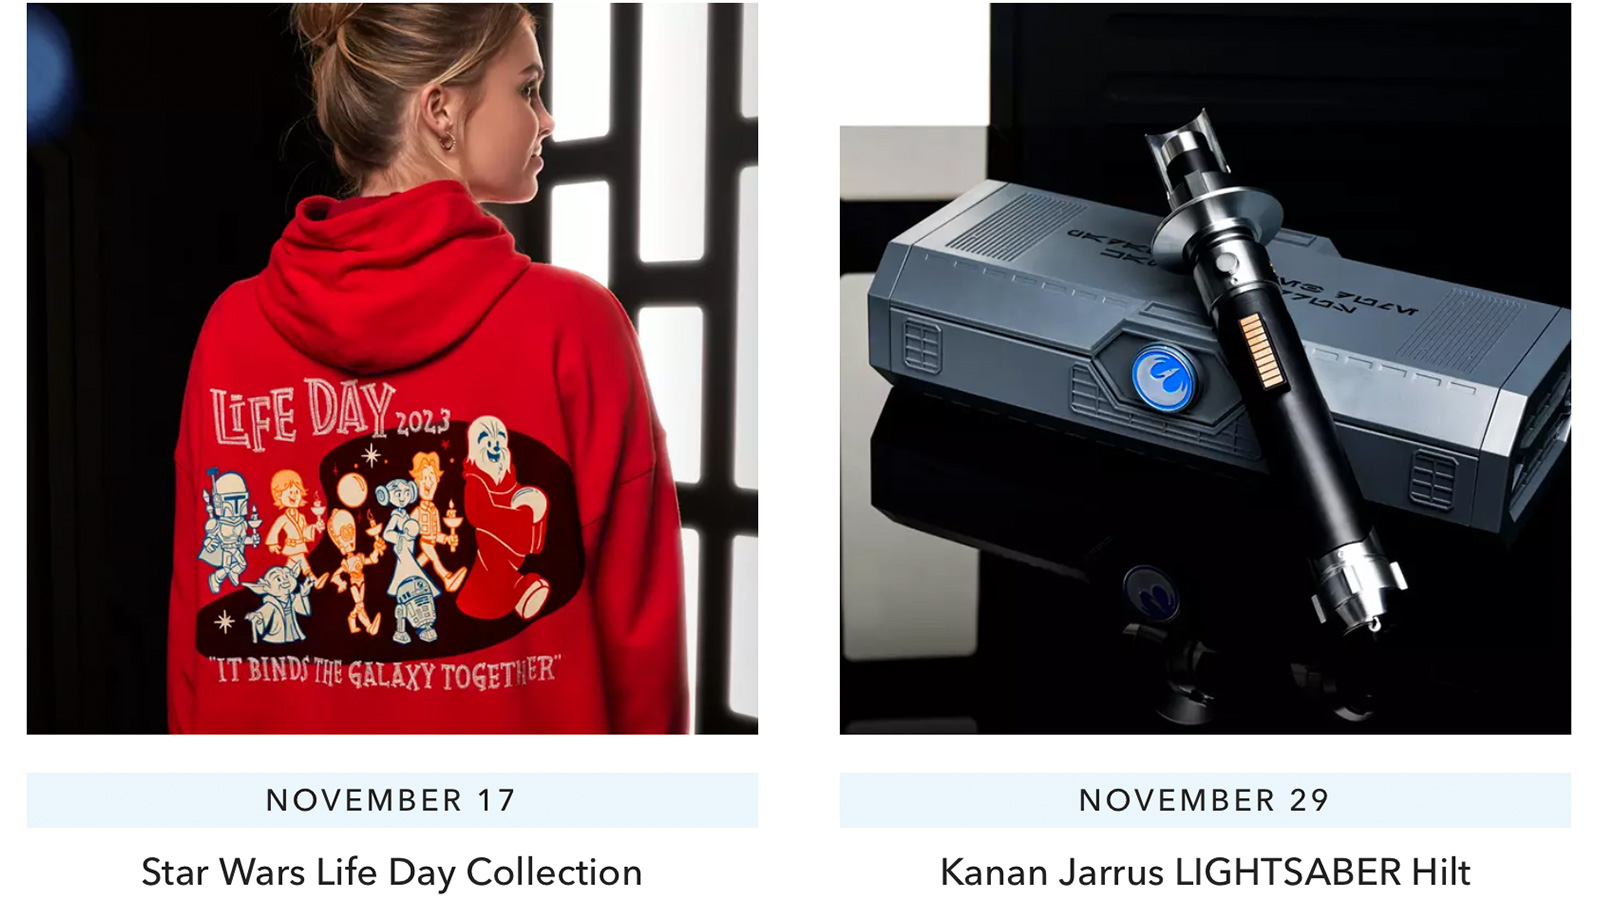 Up Coming Shop Disney Releases - Life Day Collection & Kanan Lightsaber Hilt